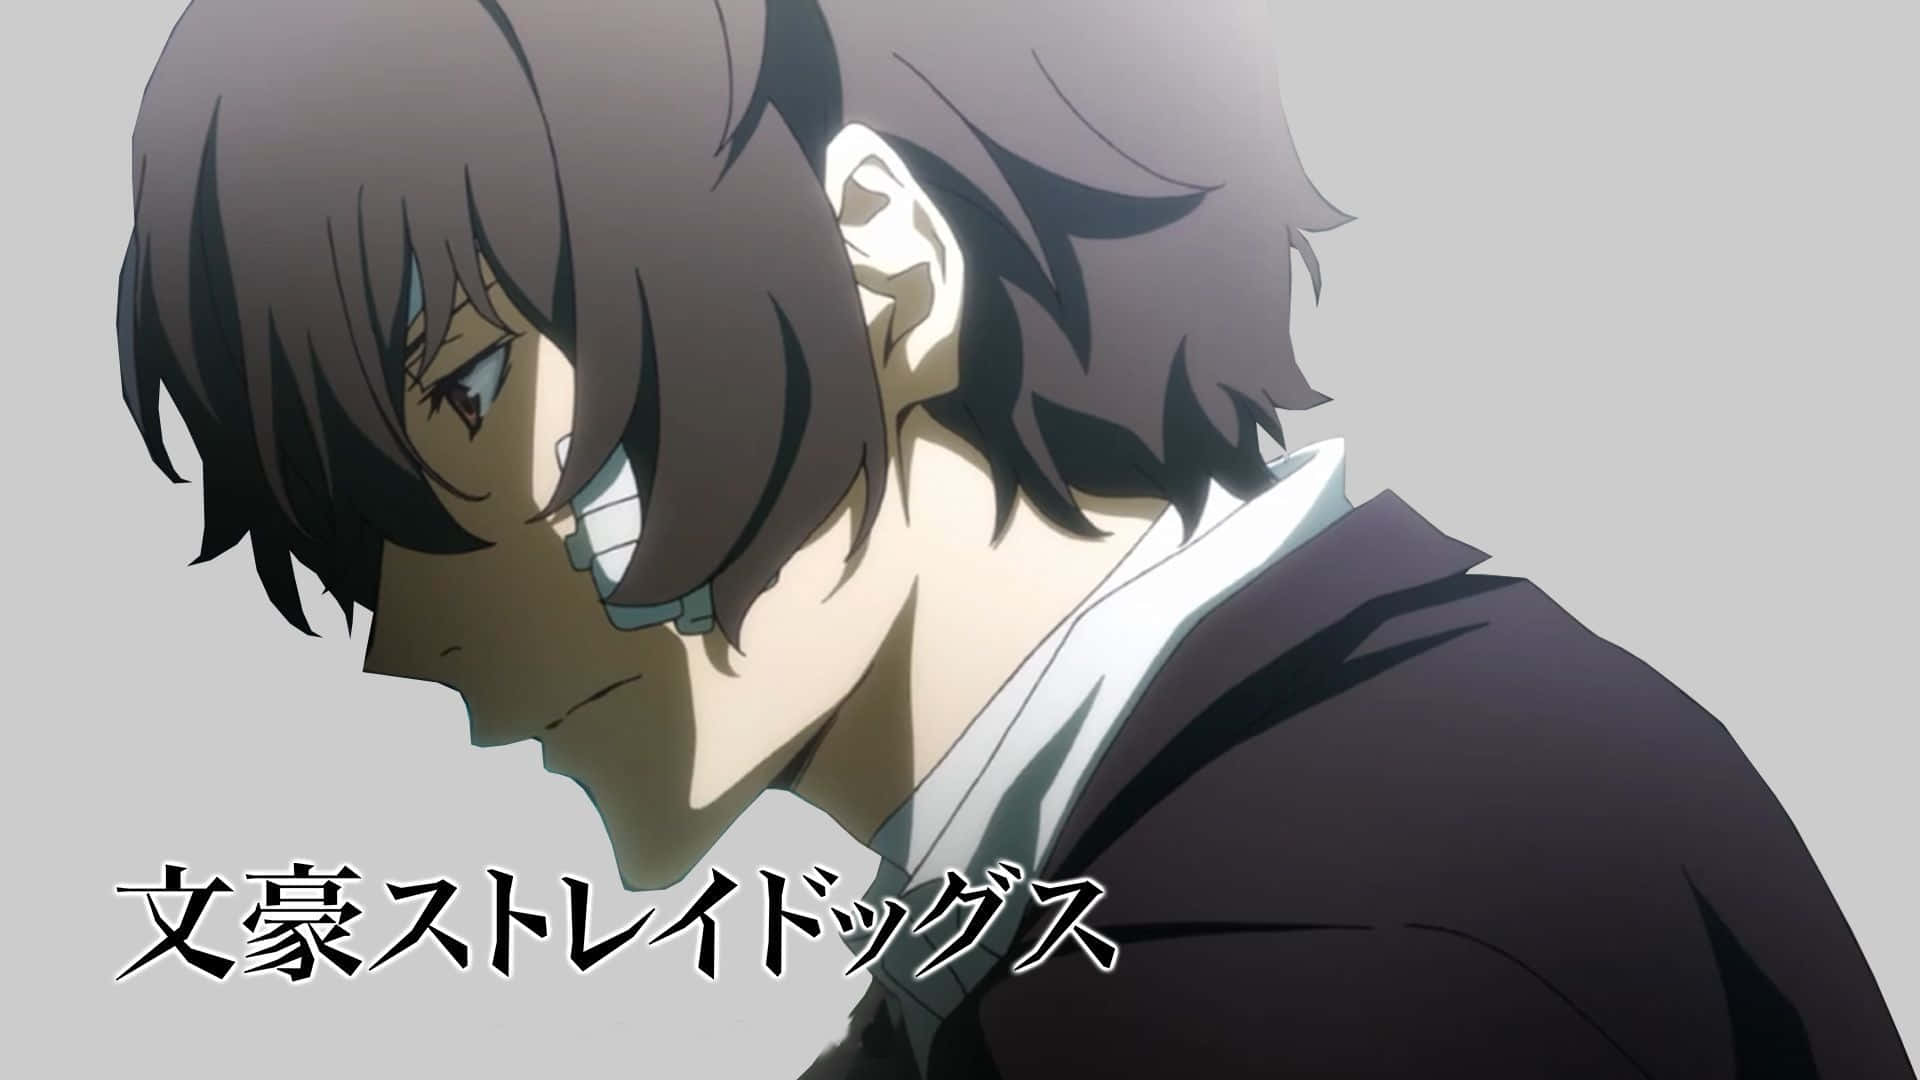 Captivating Side Profile Of Dazai Osamu In Deep Thought Background